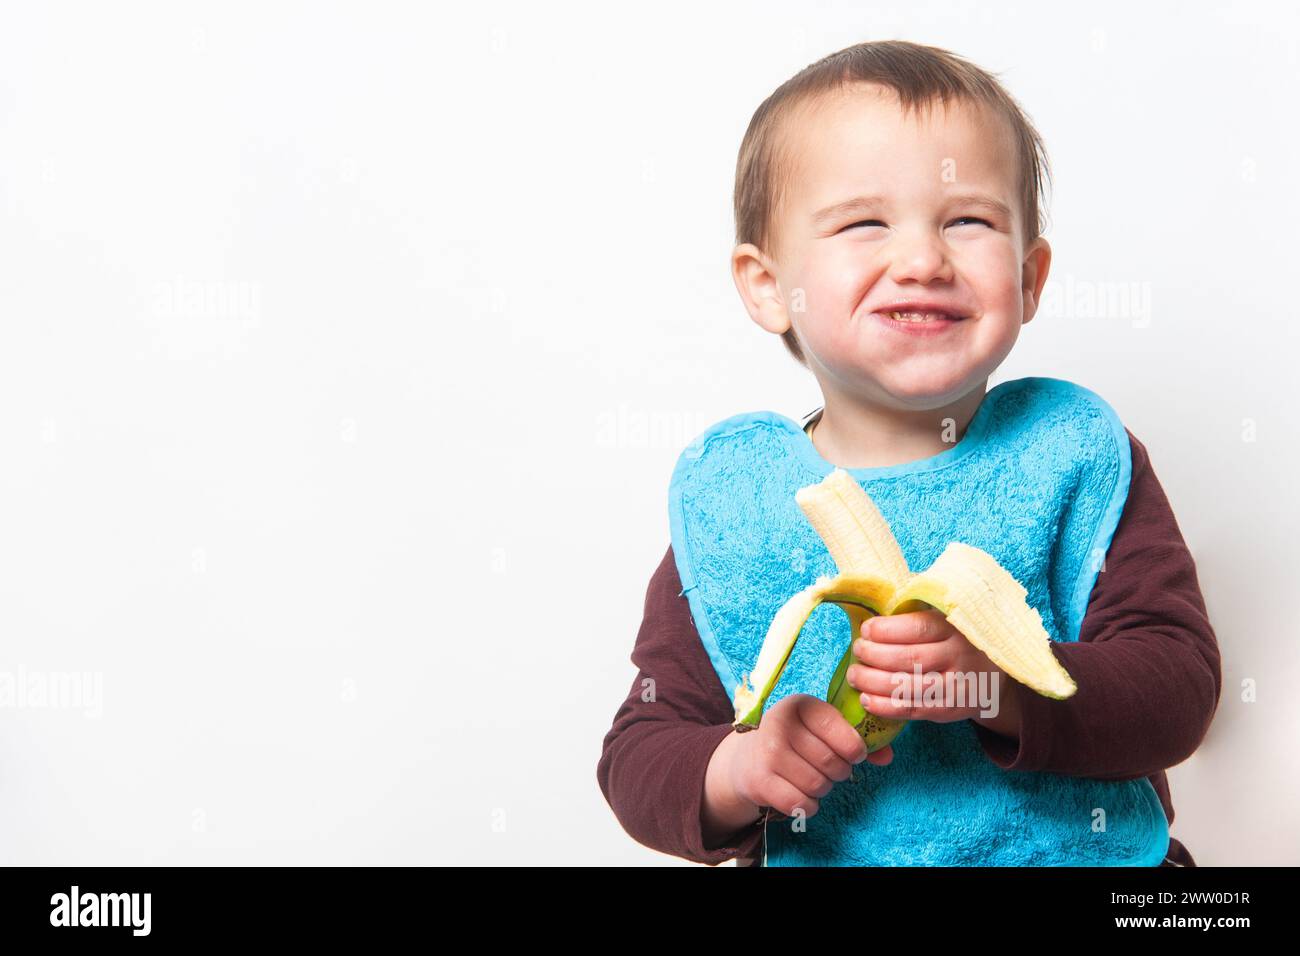 Toddler with blue bib eating a banana with a big smile on his face enjoying the tasty tropical produce. Copy space. White background. Isolated. Stock Photo